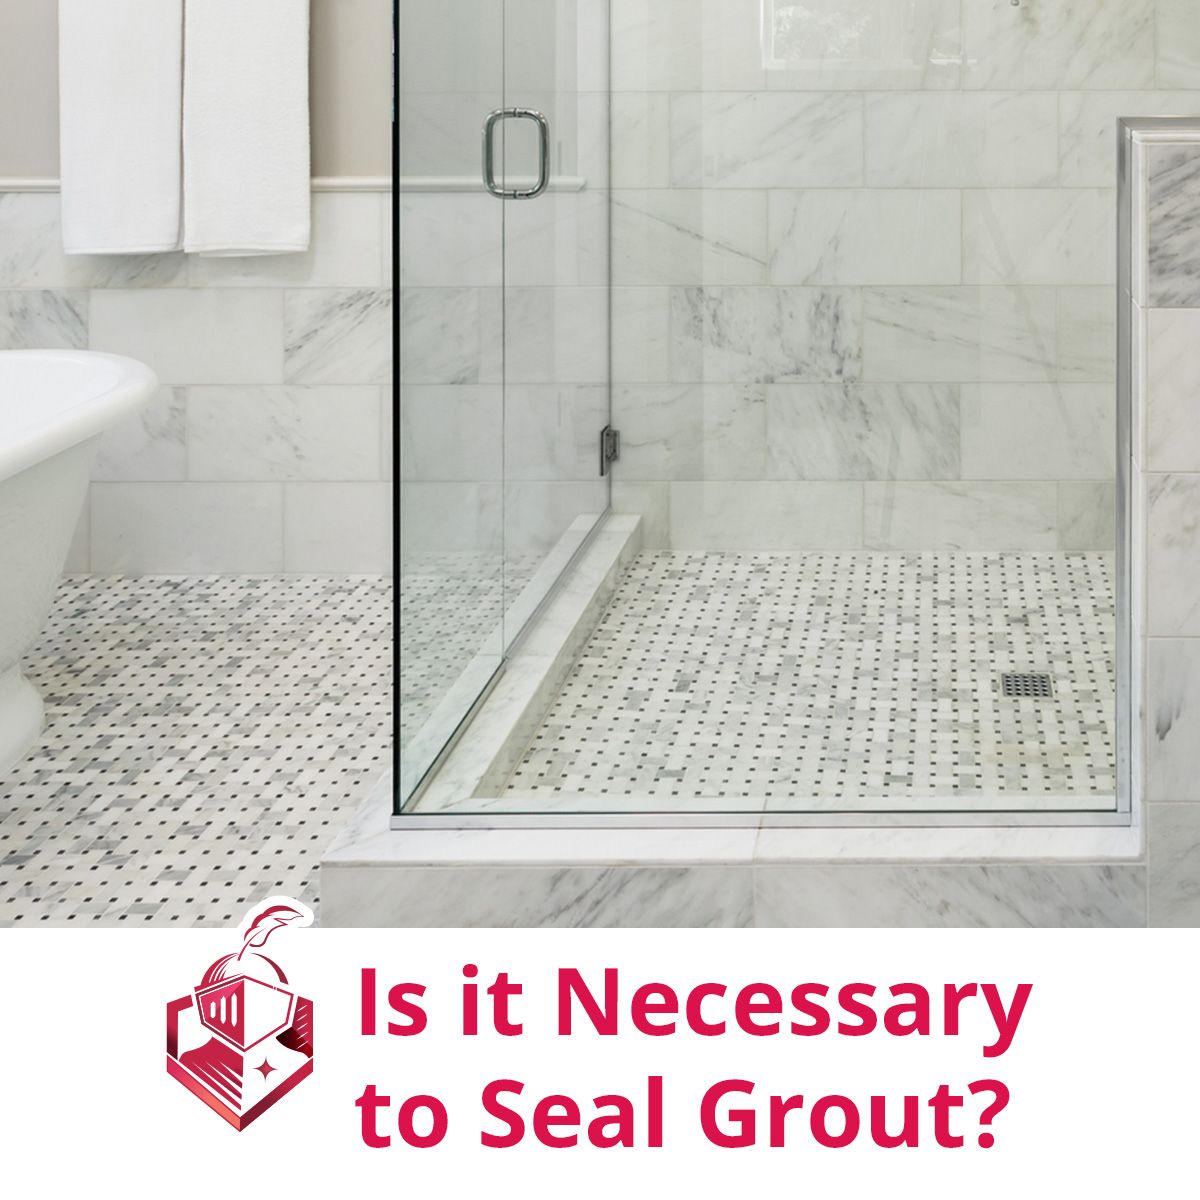 Is it Necessary to Seal Grout?